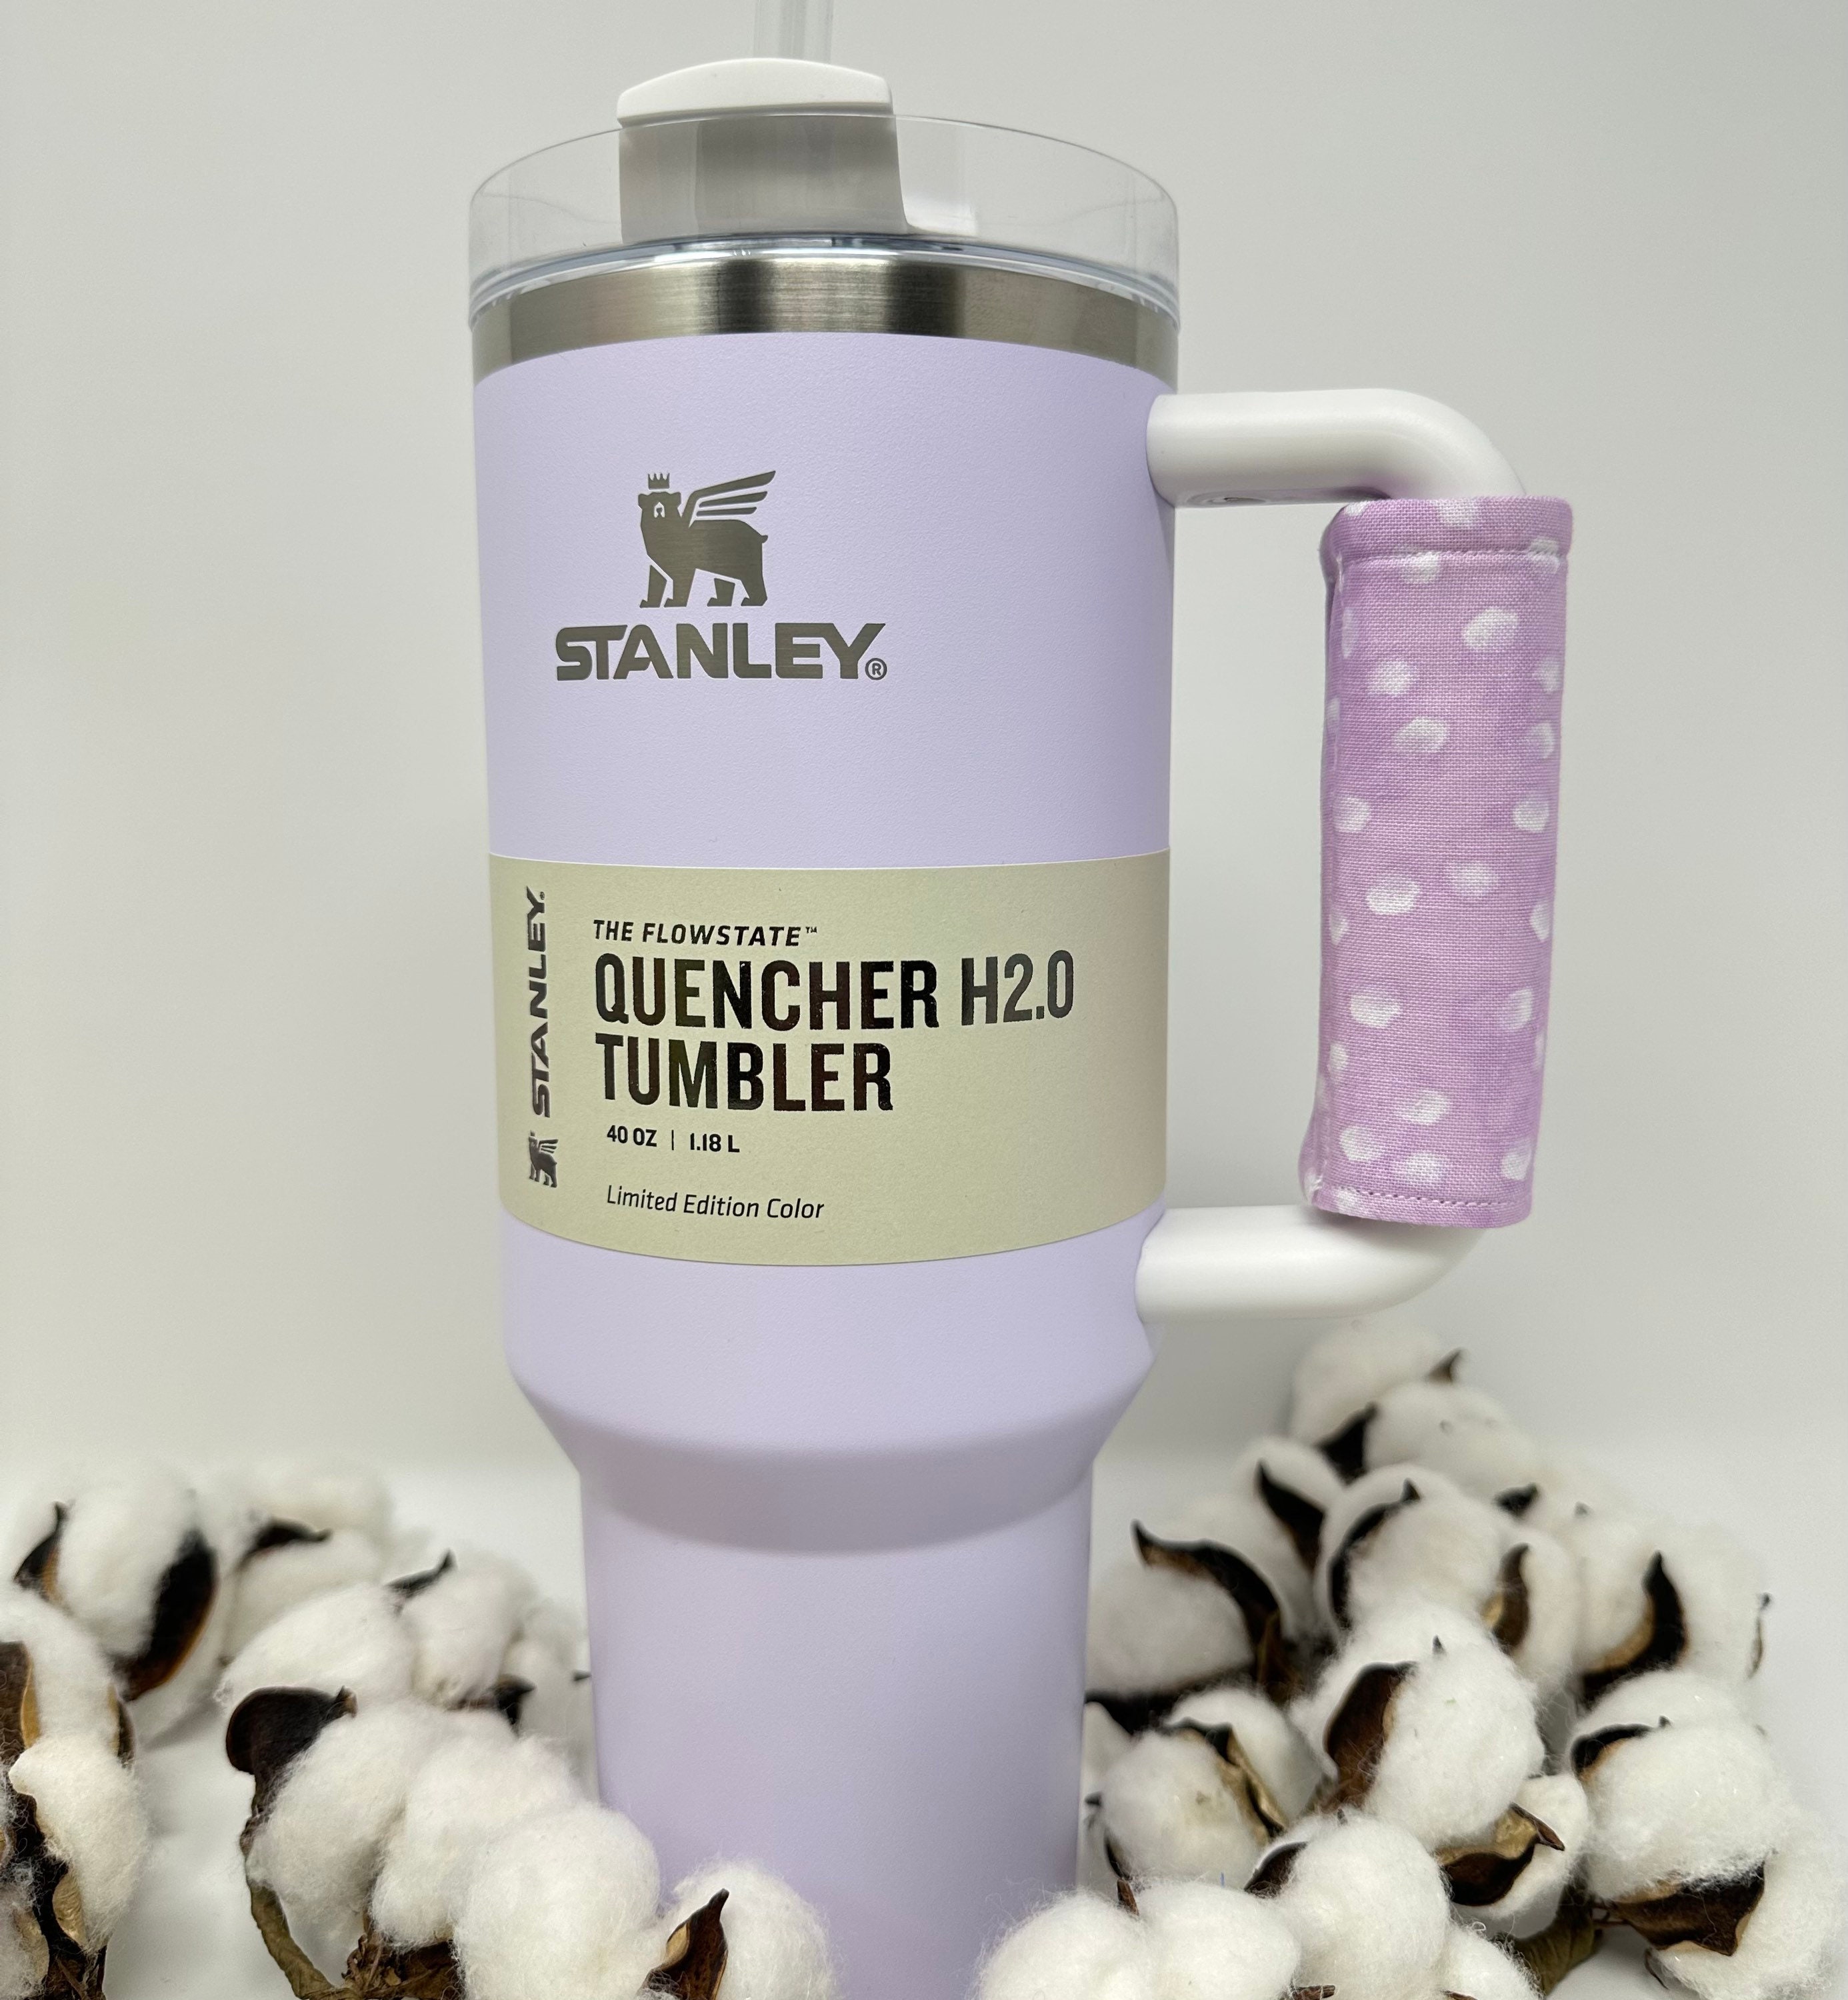 Stanley Quencher H2.0 FlowState 40oz Tumbler Wisteria Purple Limited Edition